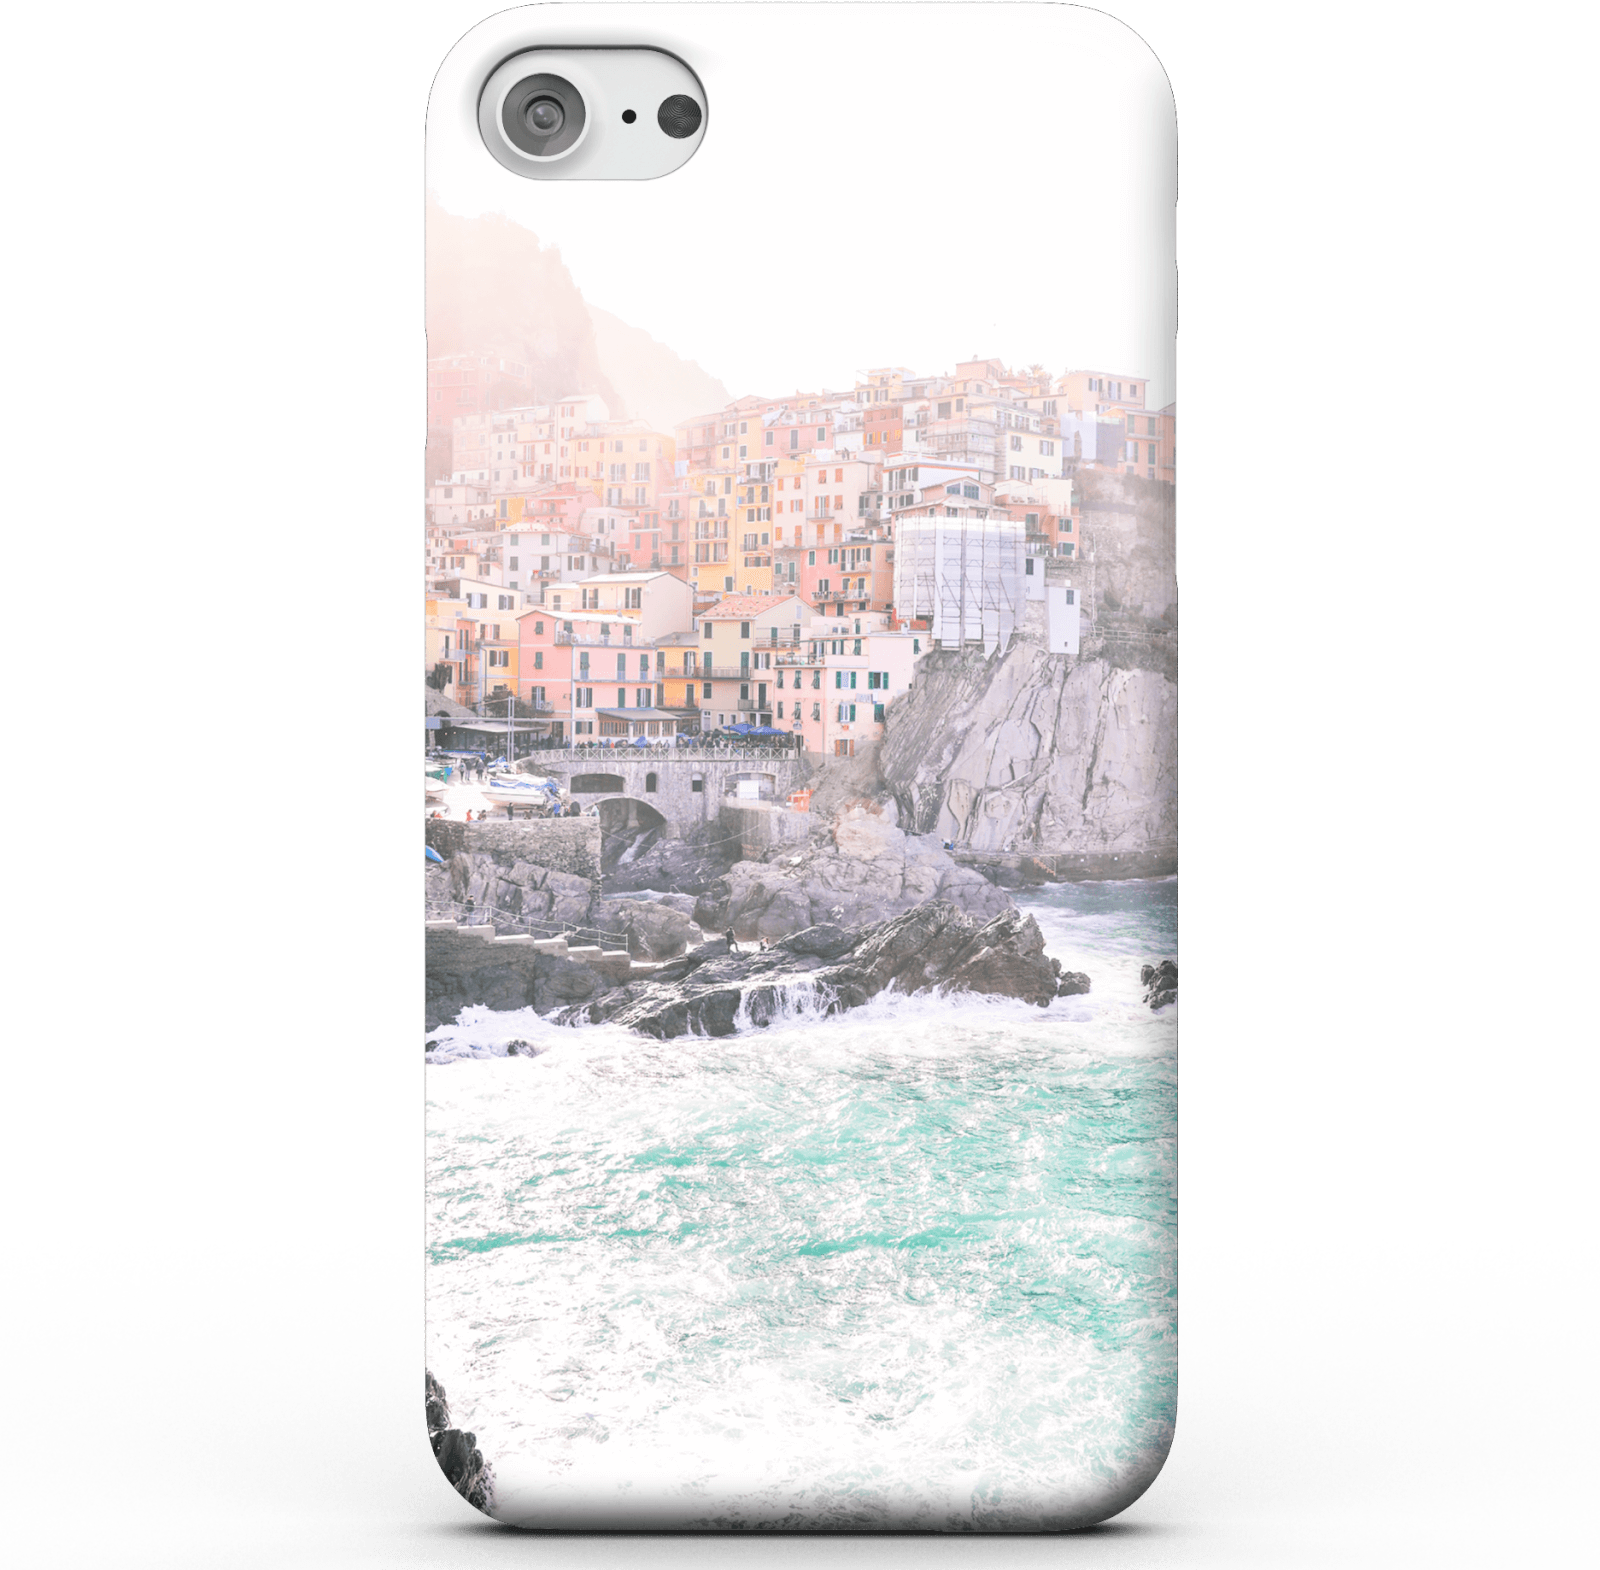 Town On The Waves Phone Case for iPhone and Android - iPhone 5/5s - Snap Case - Matte